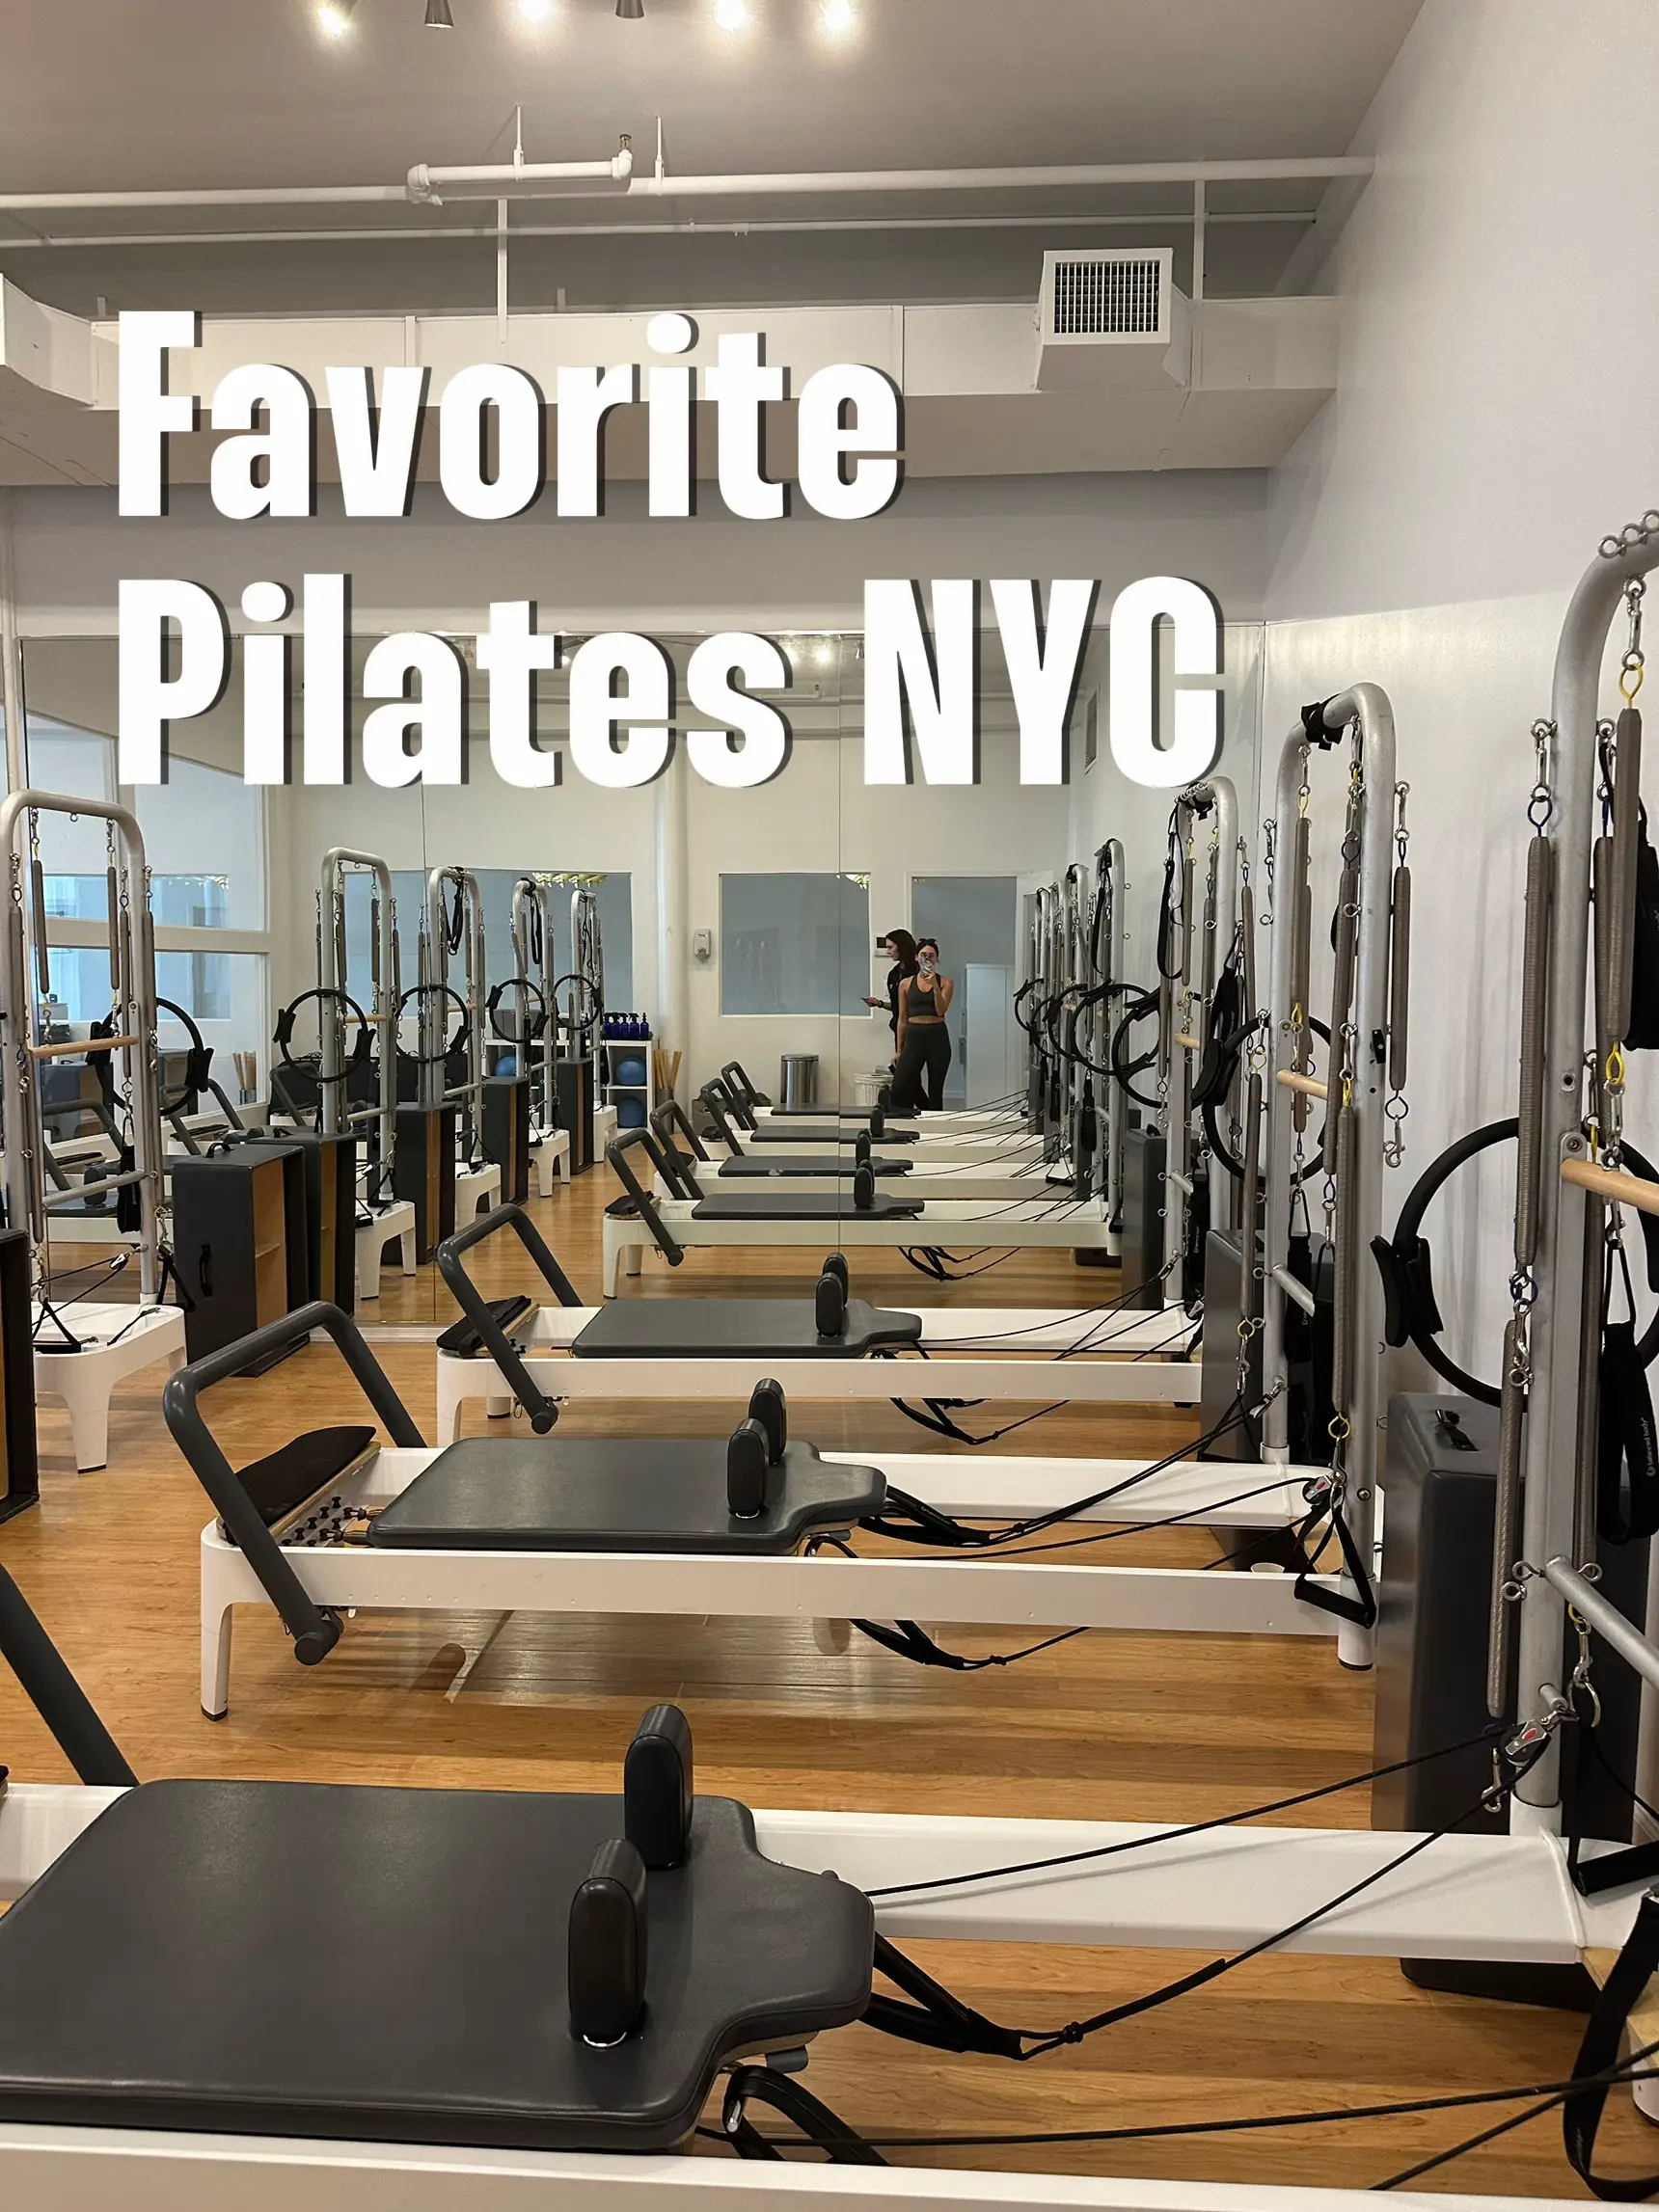 Types of Pilates, Gallery posted by jeneecsmith